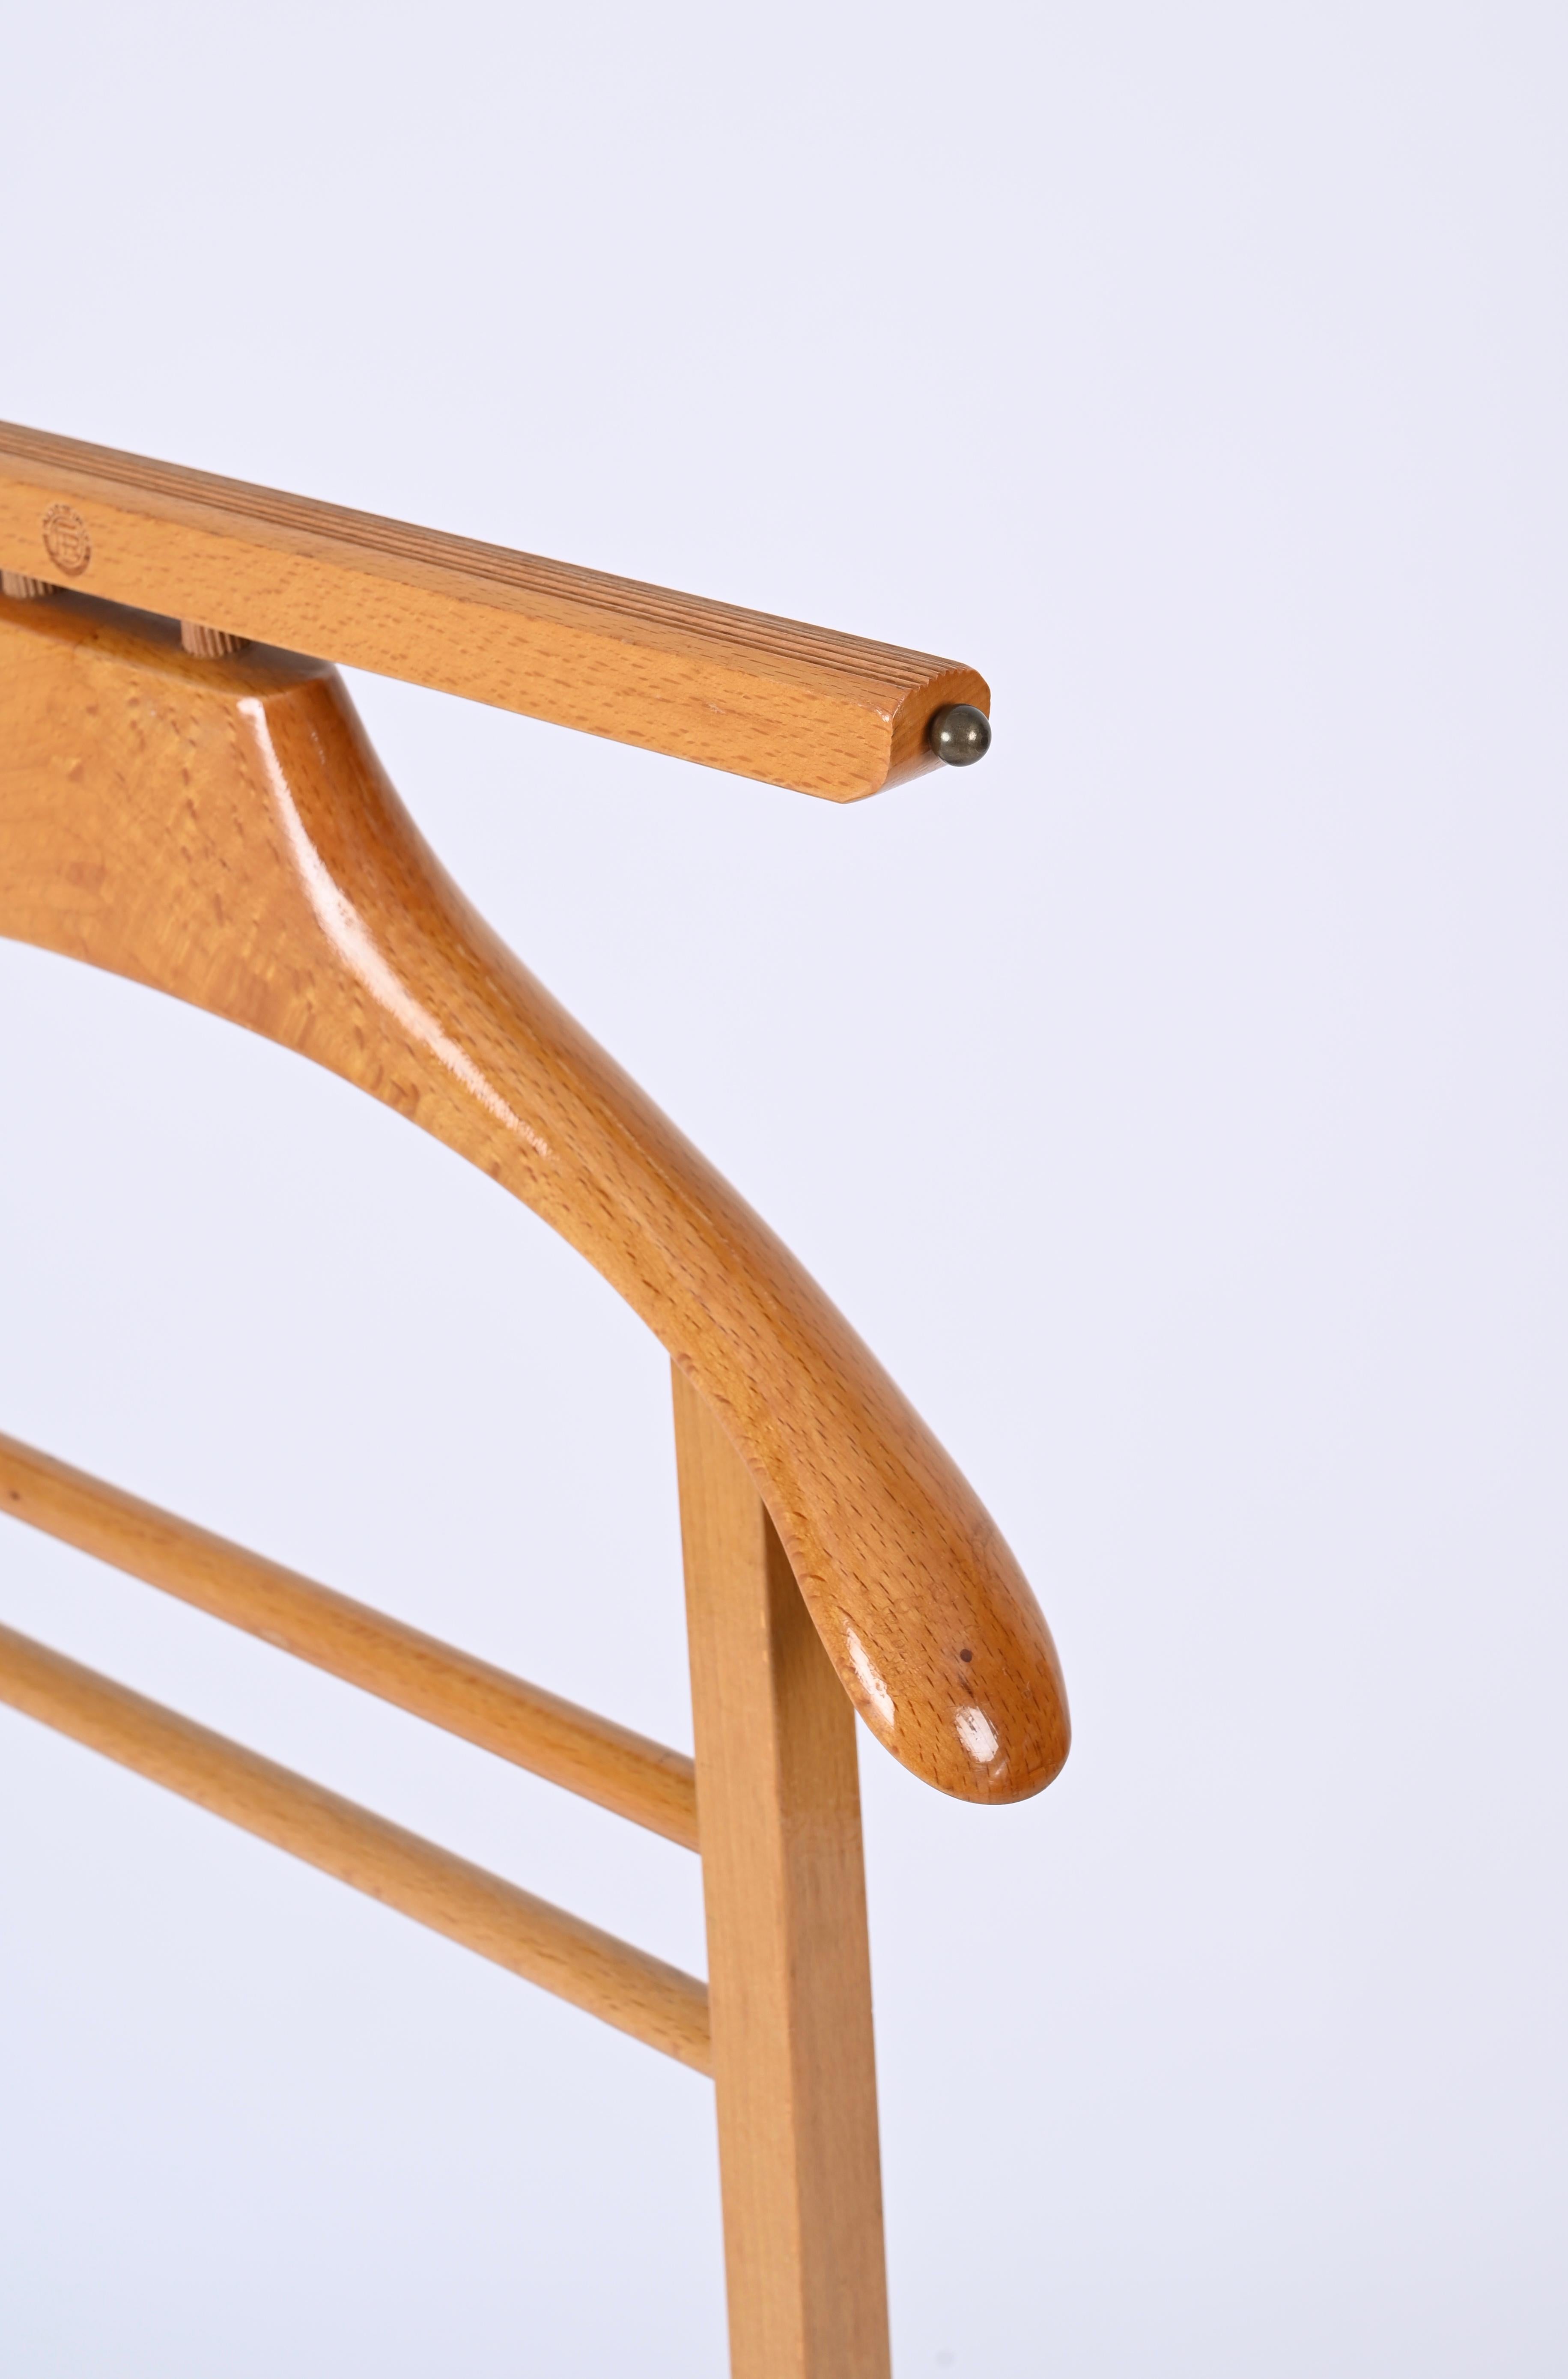 Hand-Crafted Fratelli Reguitti Midcentury Valet Stand in Beechwood and Brass, Italy, 1960s